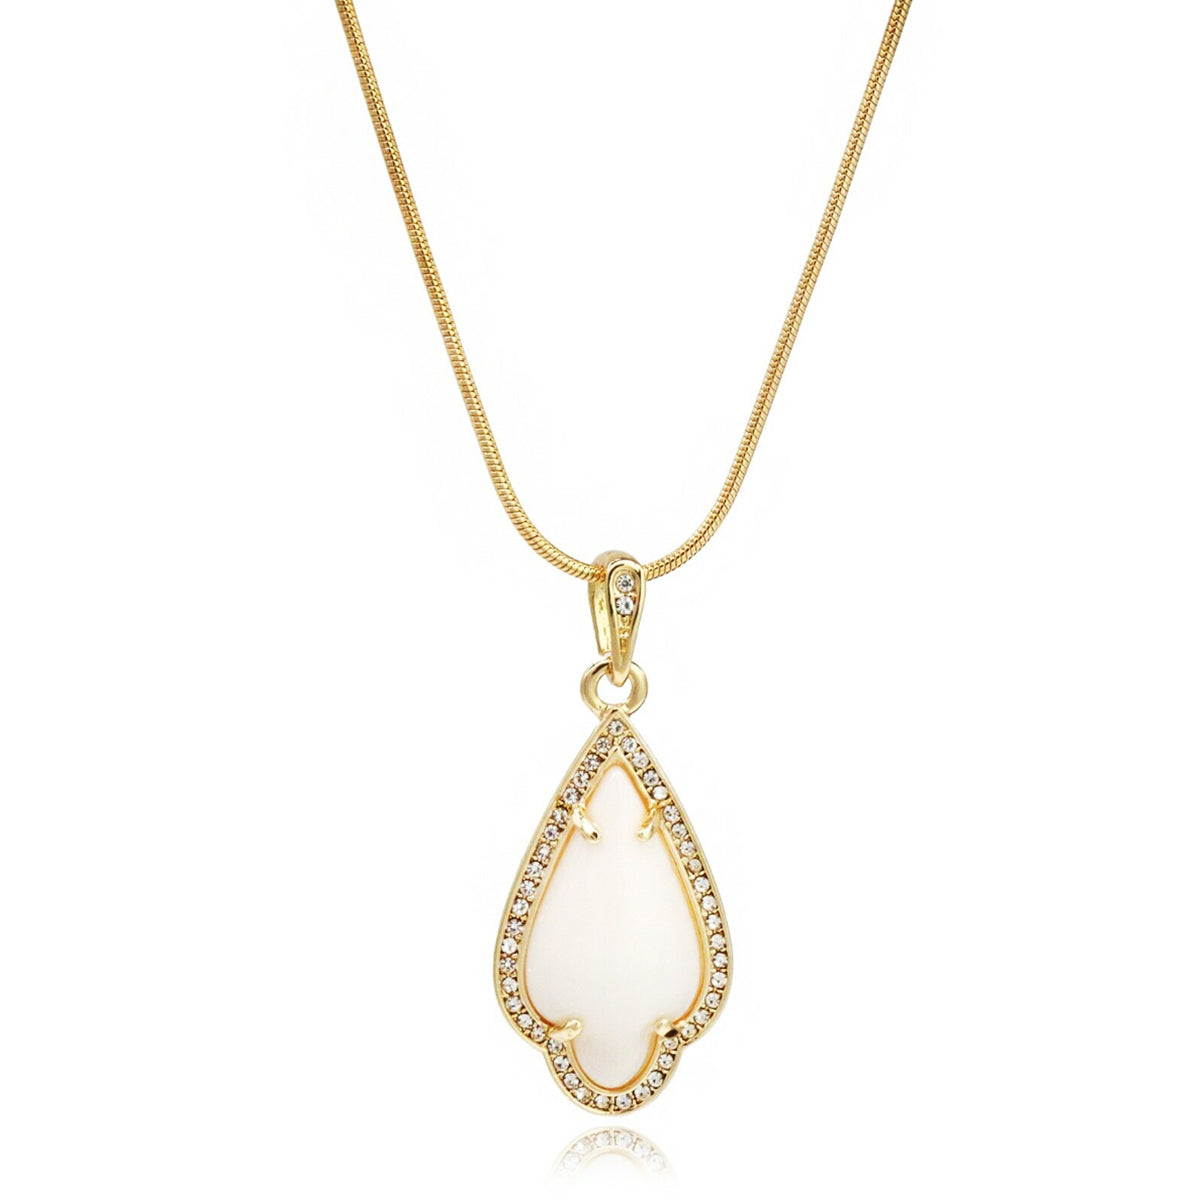 White Women's Pendants 14K Gold Plated Lab Diamond Mounted Curved Tear Resin Jade High Fashion Jewelry Chain Pendant Necklaces